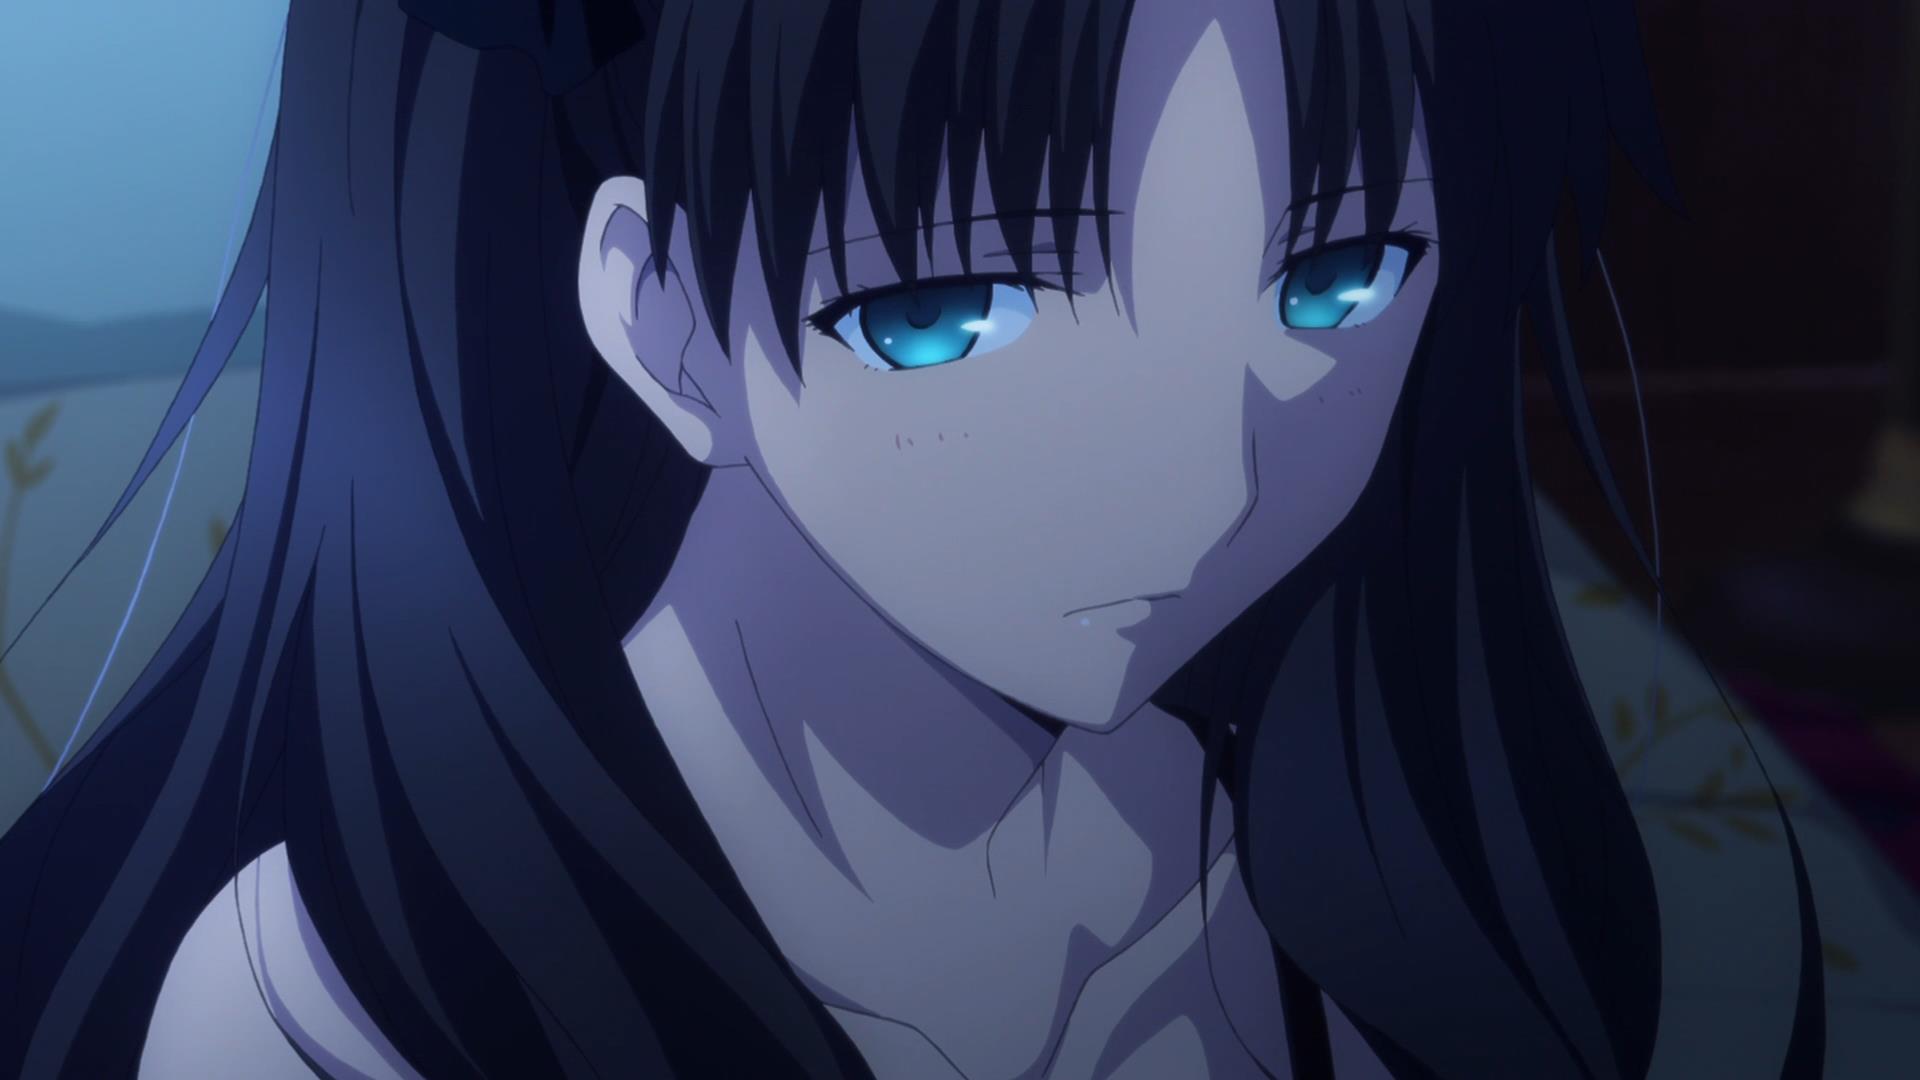 Fate/stay night: Unlimited Blade Works - 22 (Here be dragonsI mean